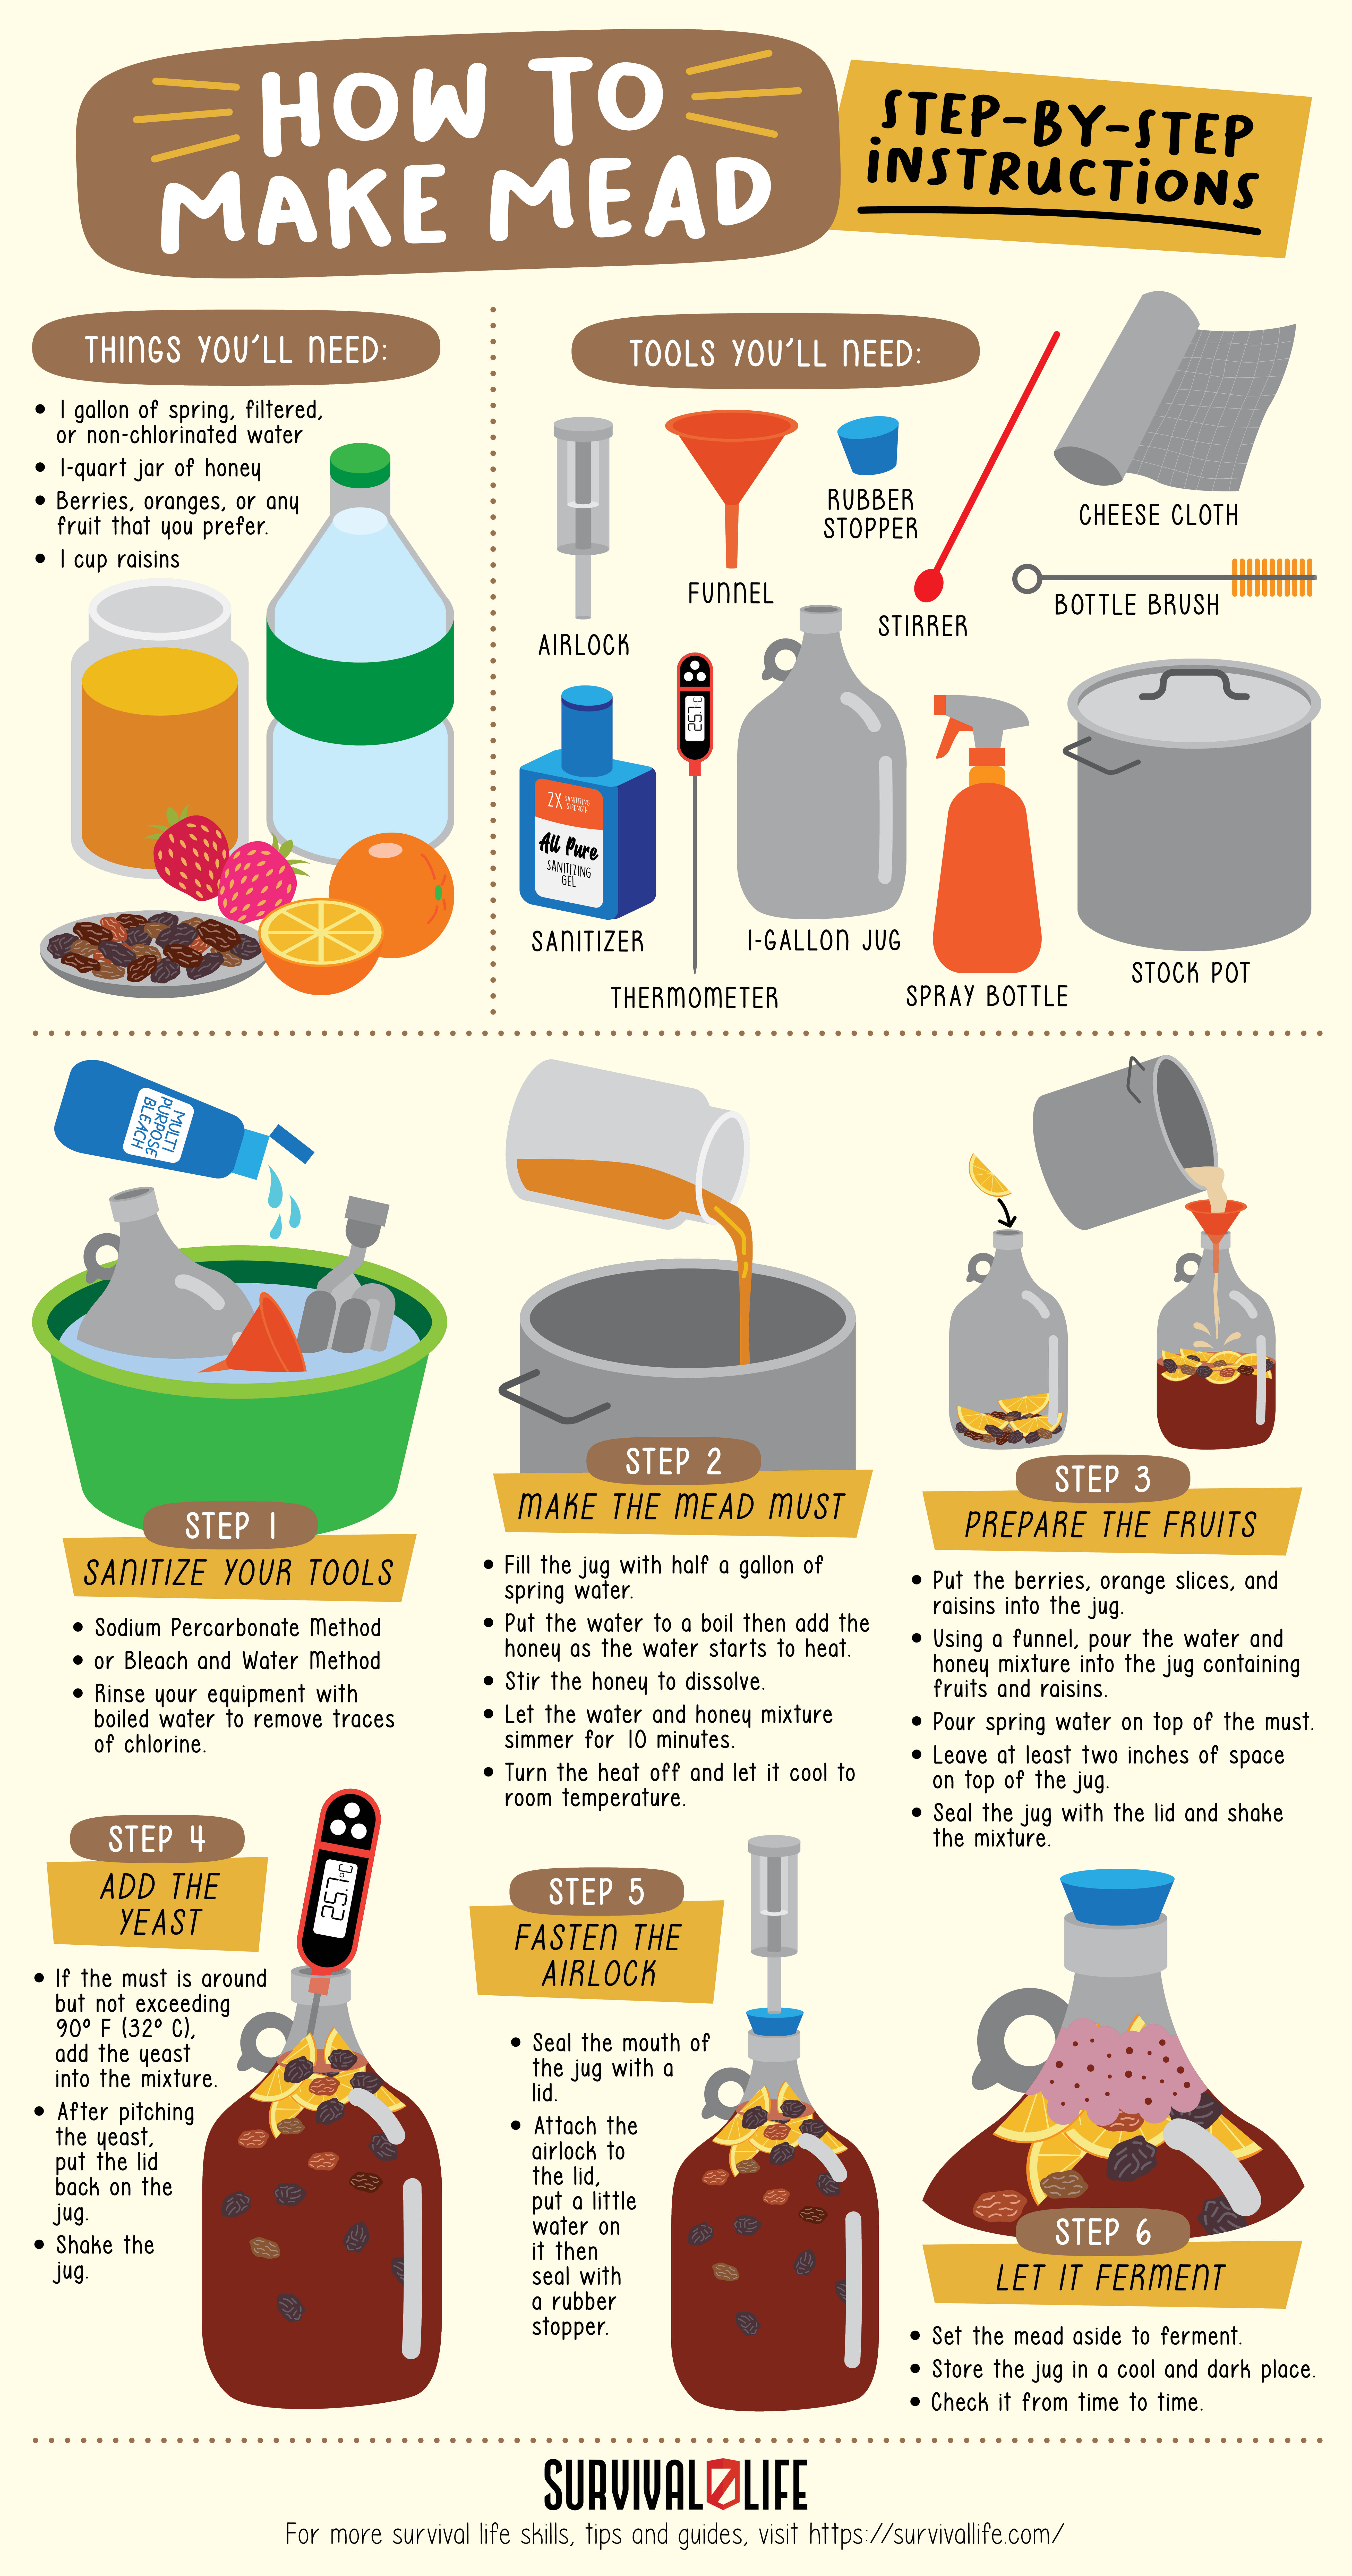 How to Make Mead